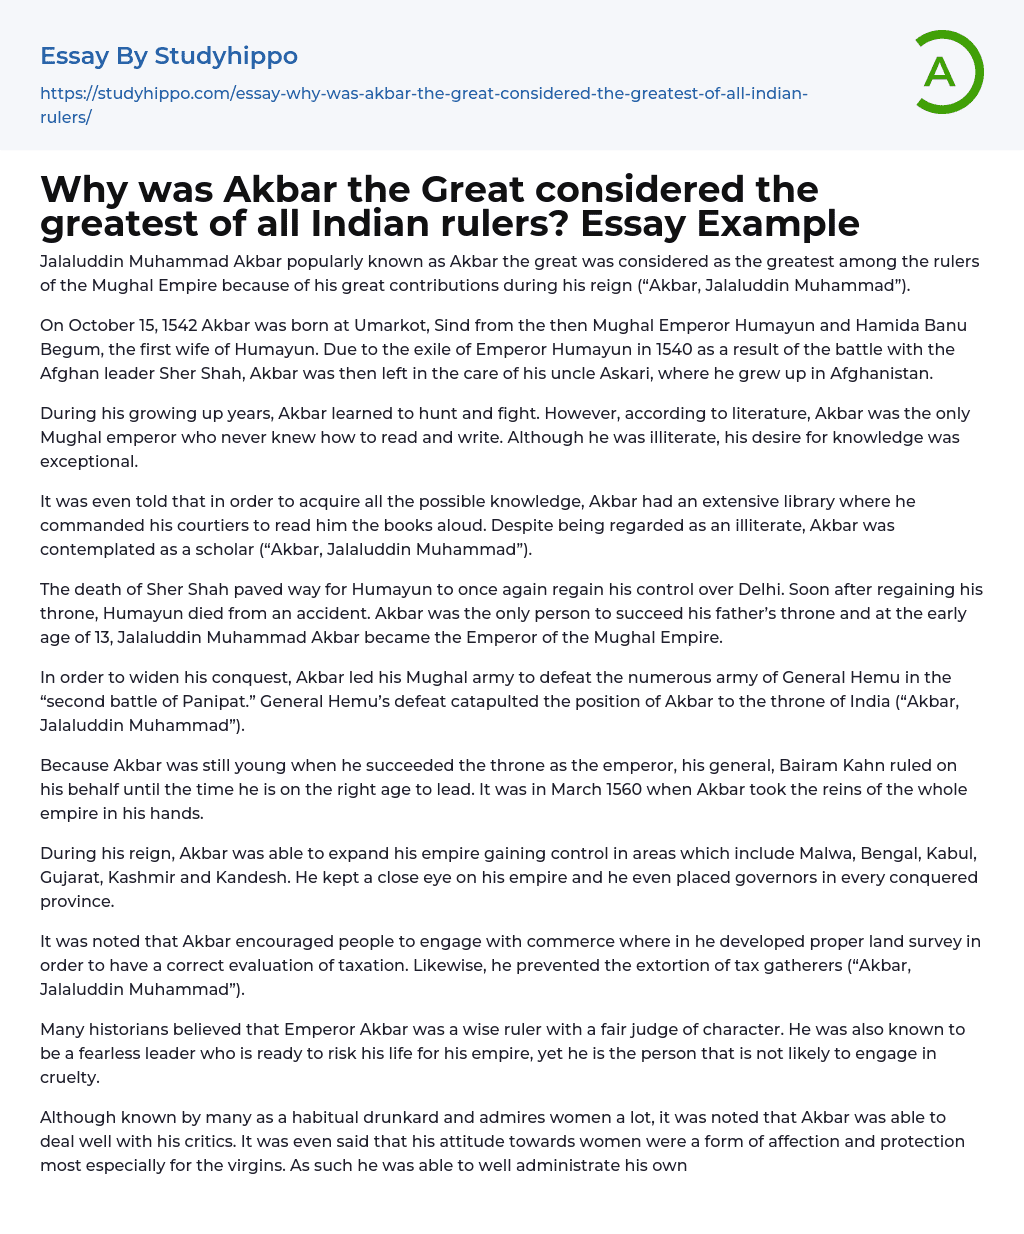 Why was Akbar the Great considered the greatest of all Indian rulers? Essay Example